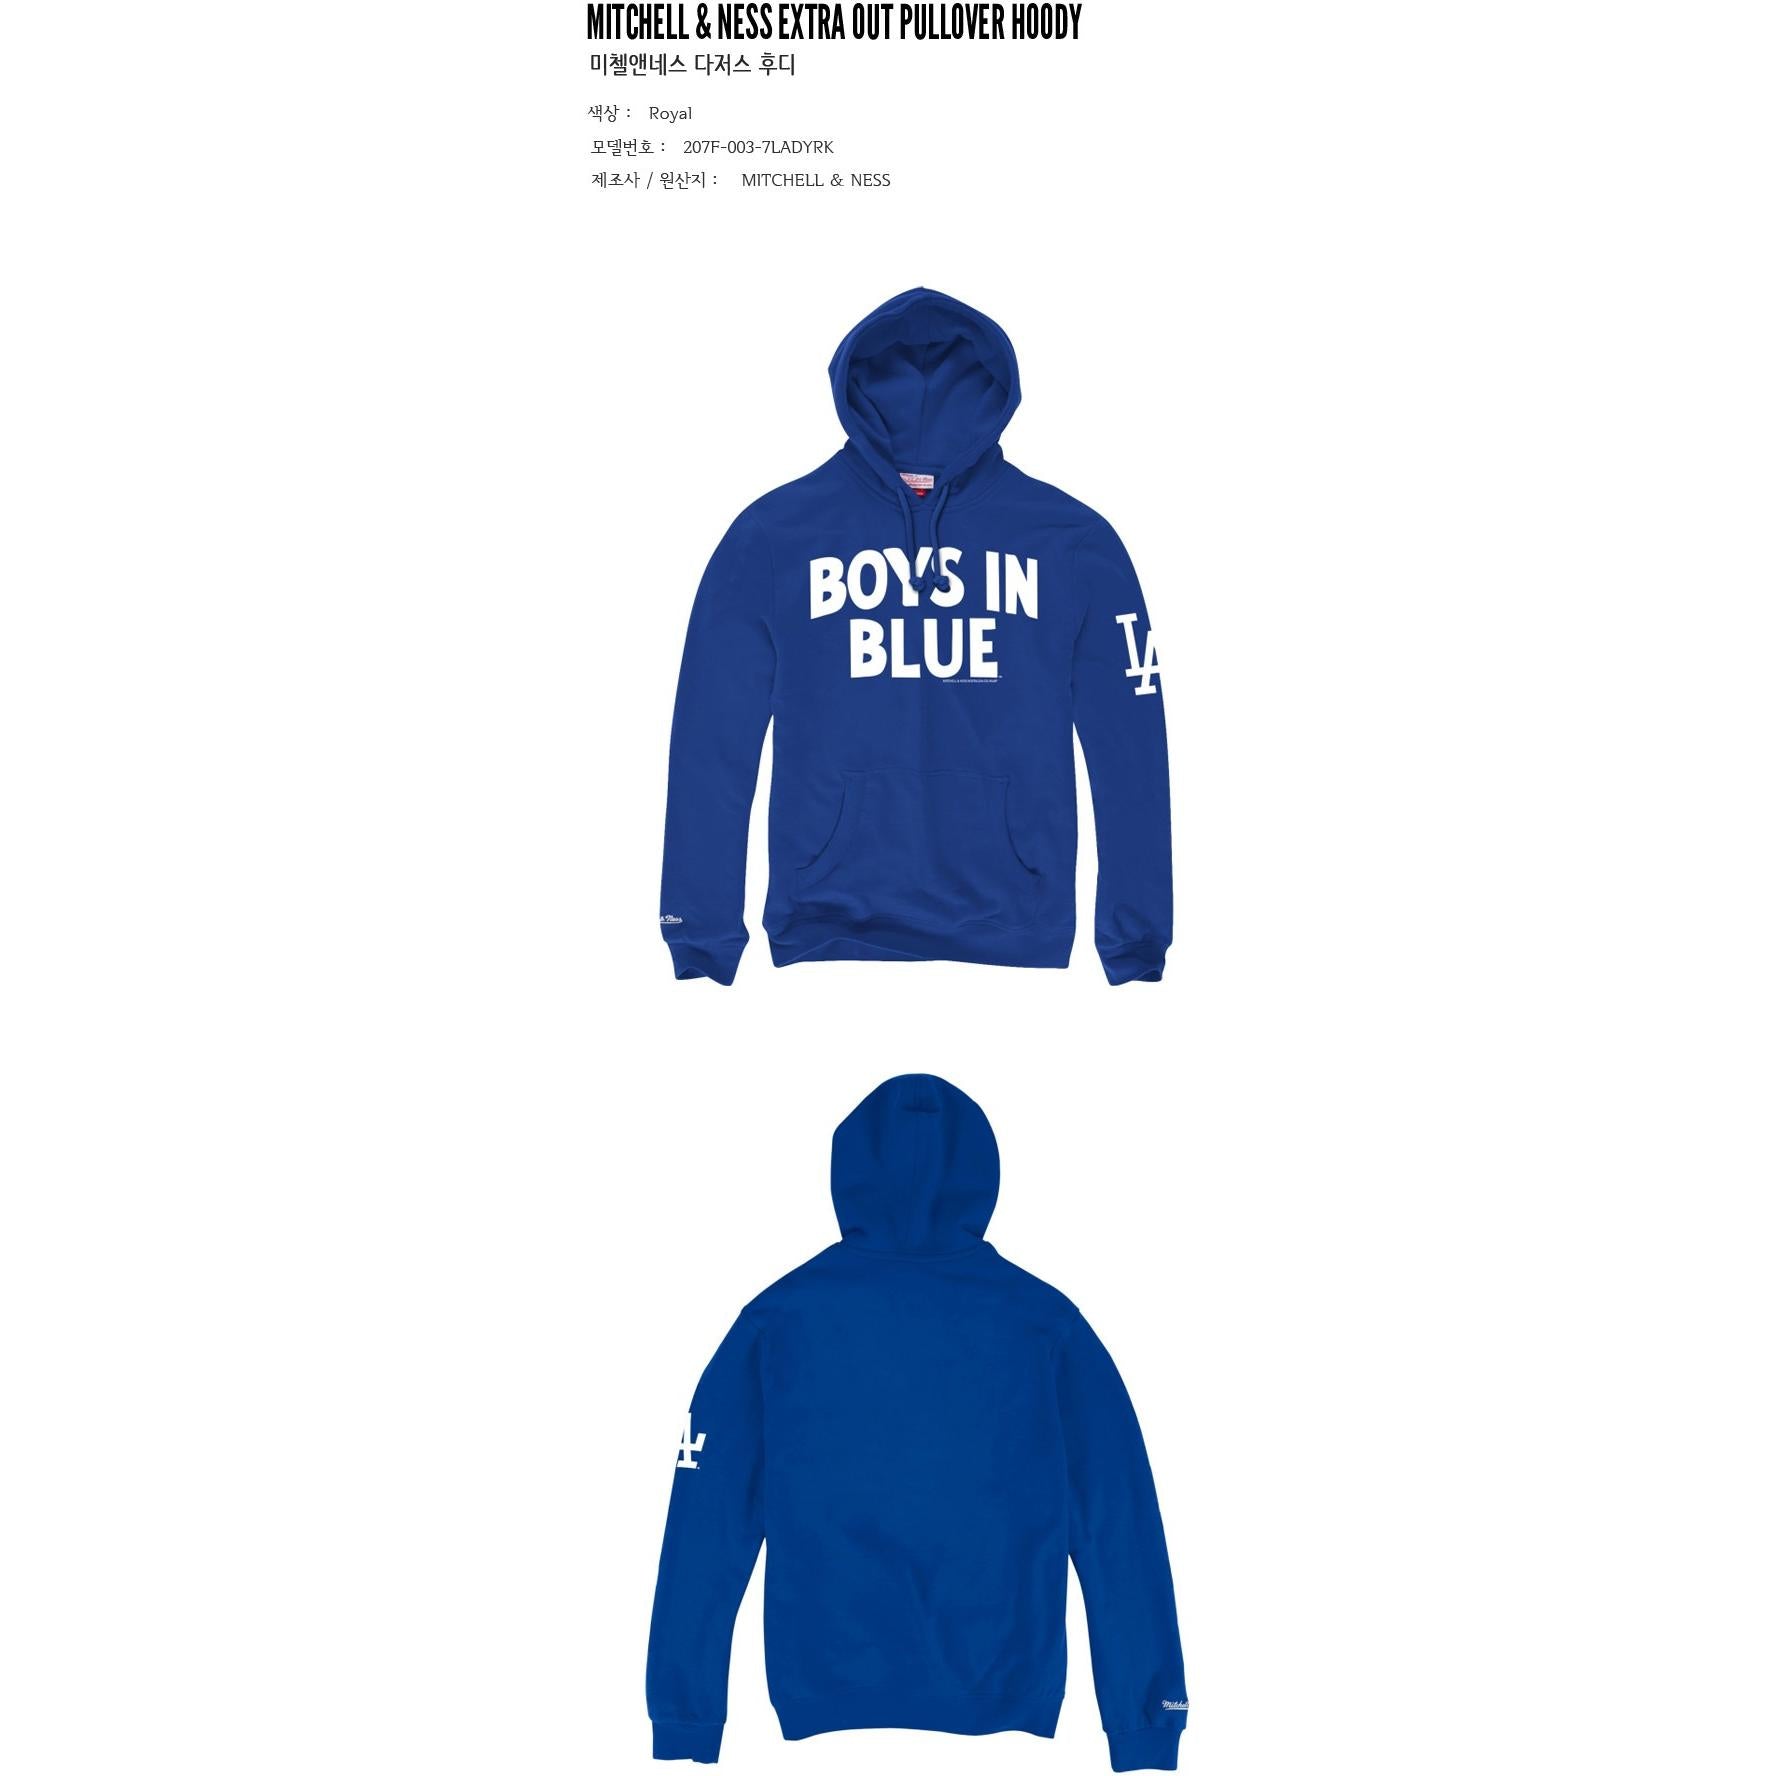 MITCHELL & NESS Extra Out Pullover Hoody Los Angeles Dodgers Royal 207F-003-7LADYRK.